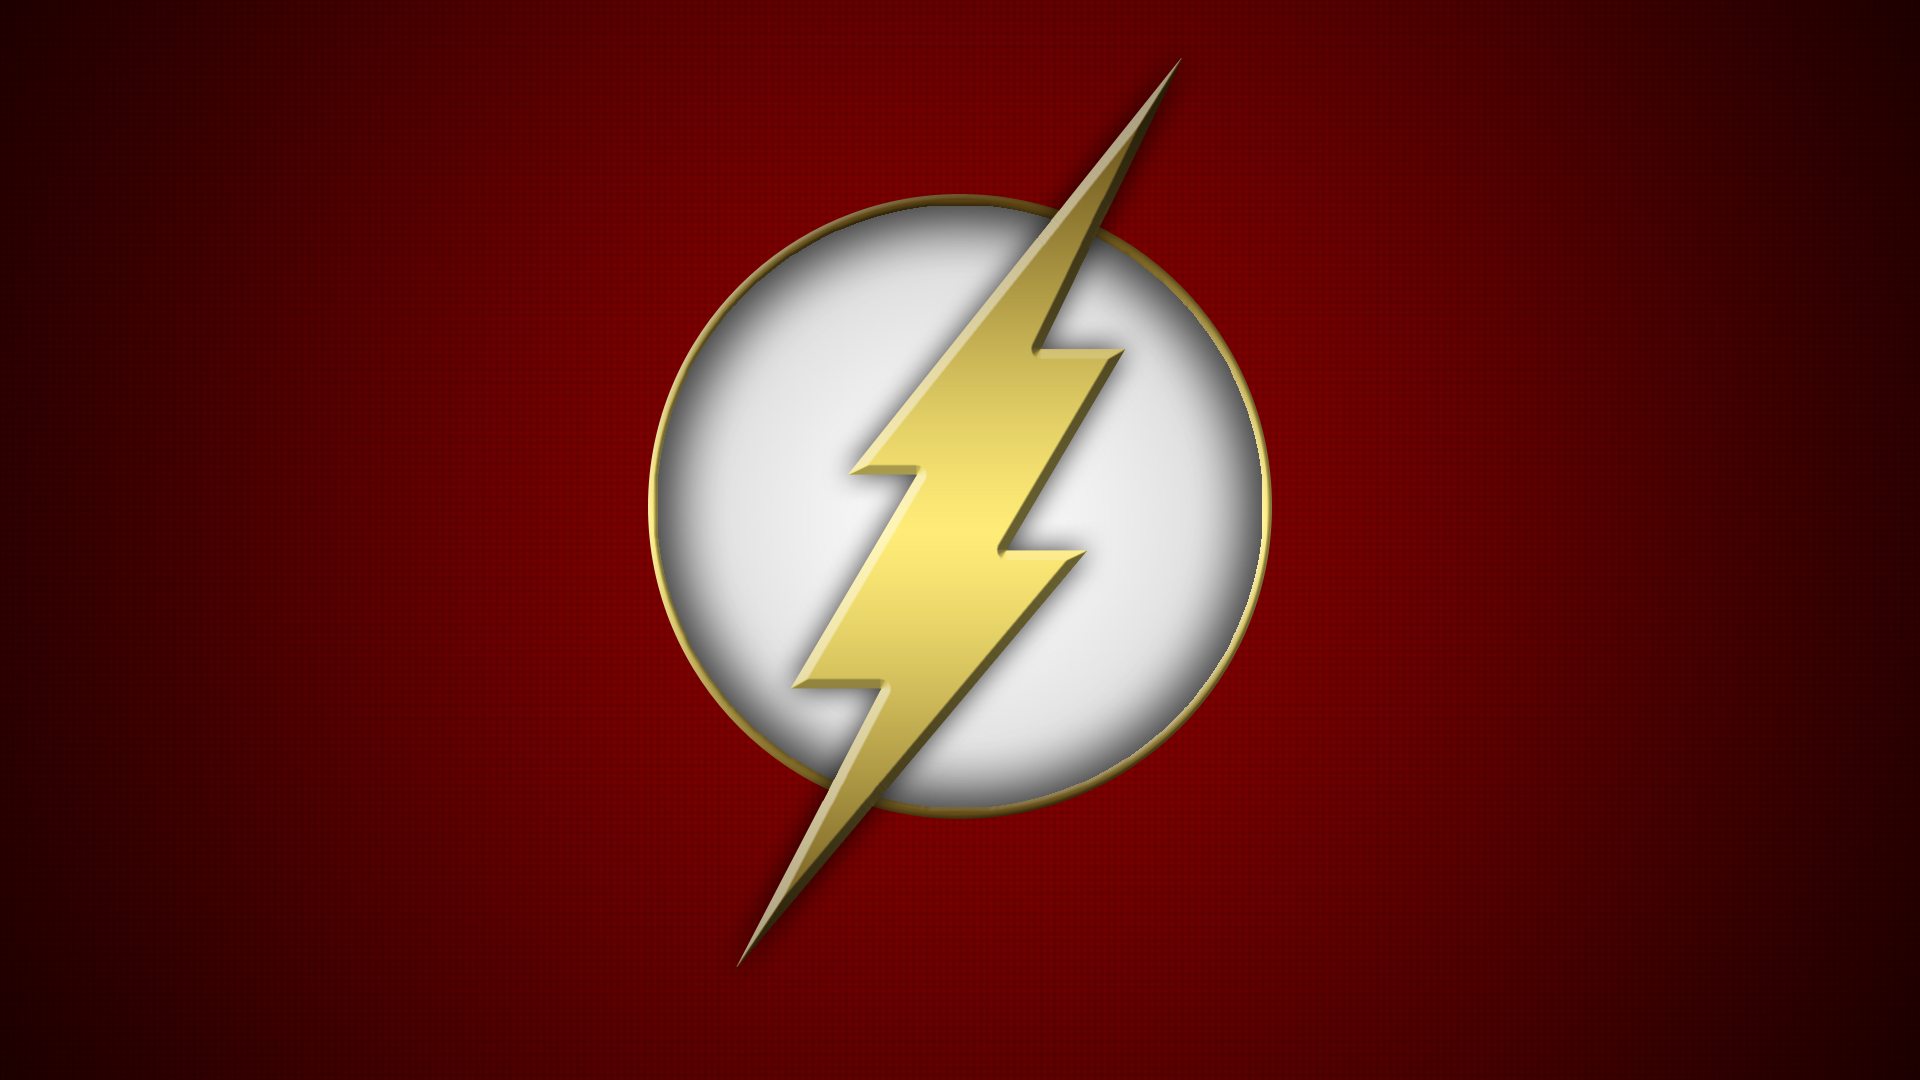 1920x1080 The Flash Wallpaper Red #5328 Wallpaper | High Quality ...